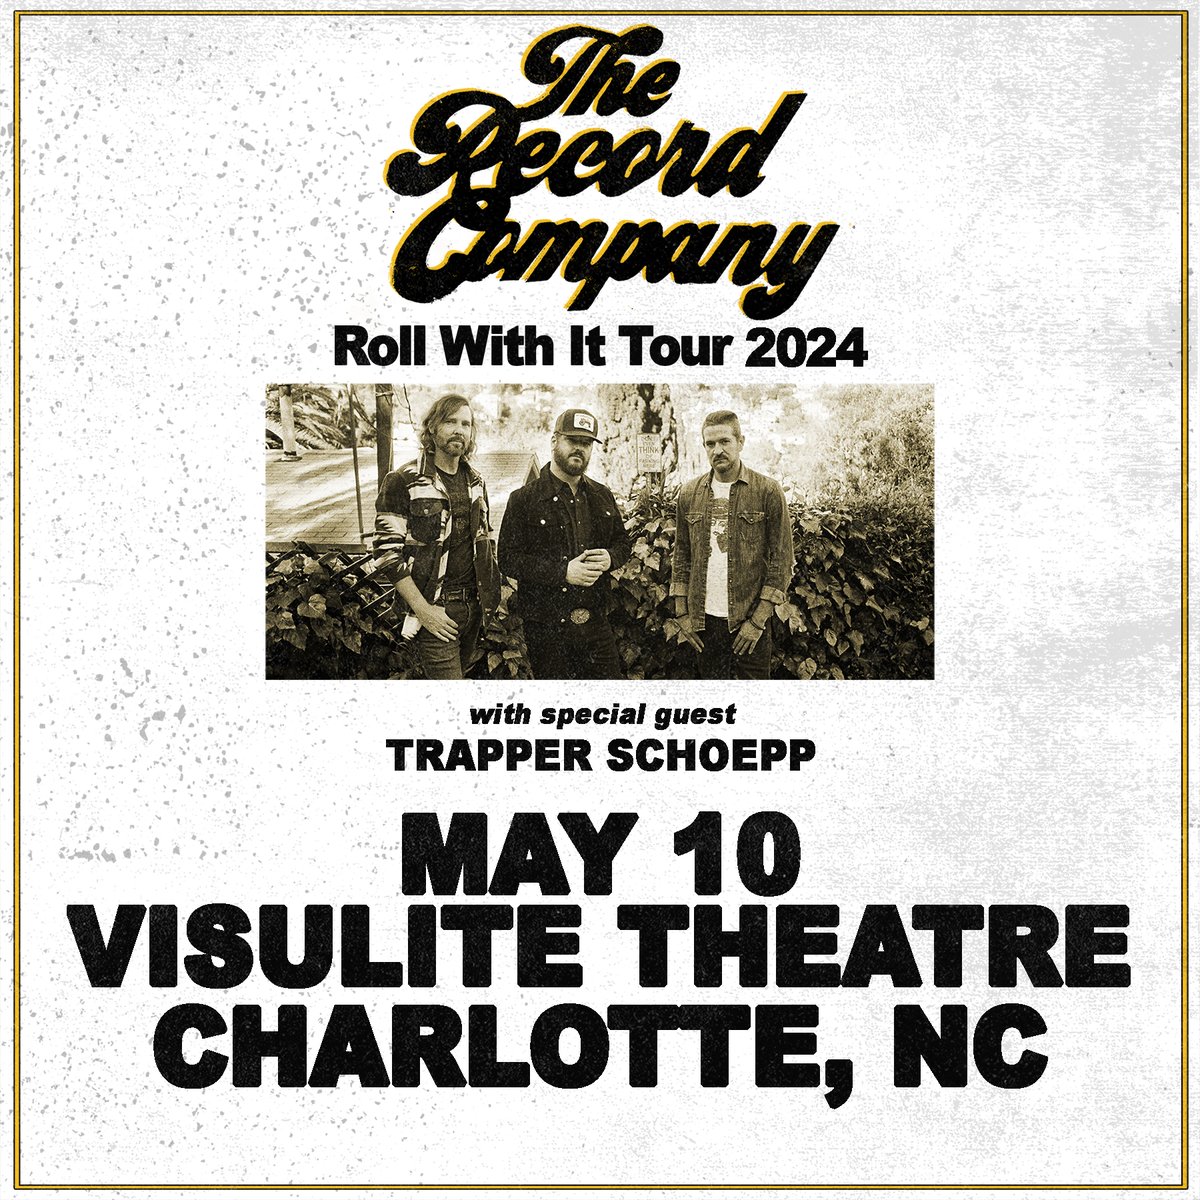 5/10 @trapperschoepp will be supporting @therecordcomp's Roll With It Tour at the @VisuliteTheatre!
Grab your tickets 👇
visulite.com/shows/details/…